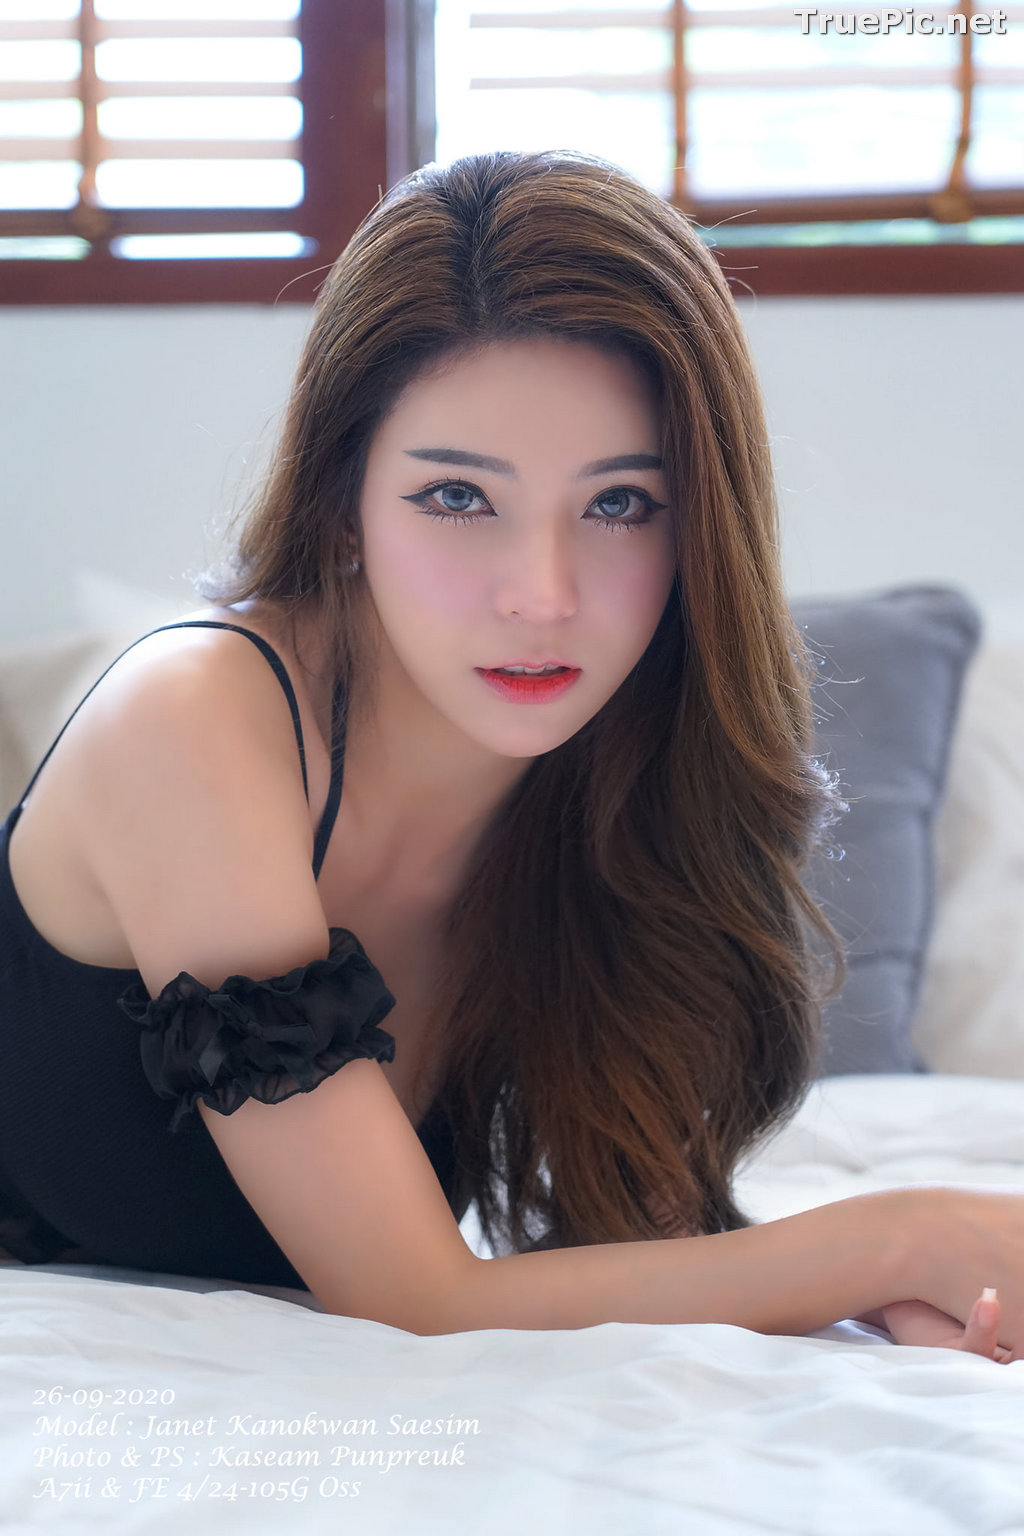 Image Thailand Model - Janet Kanokwan Saesim(เจเน็ท) - TruePic.net (50 pictures) - Picture-13